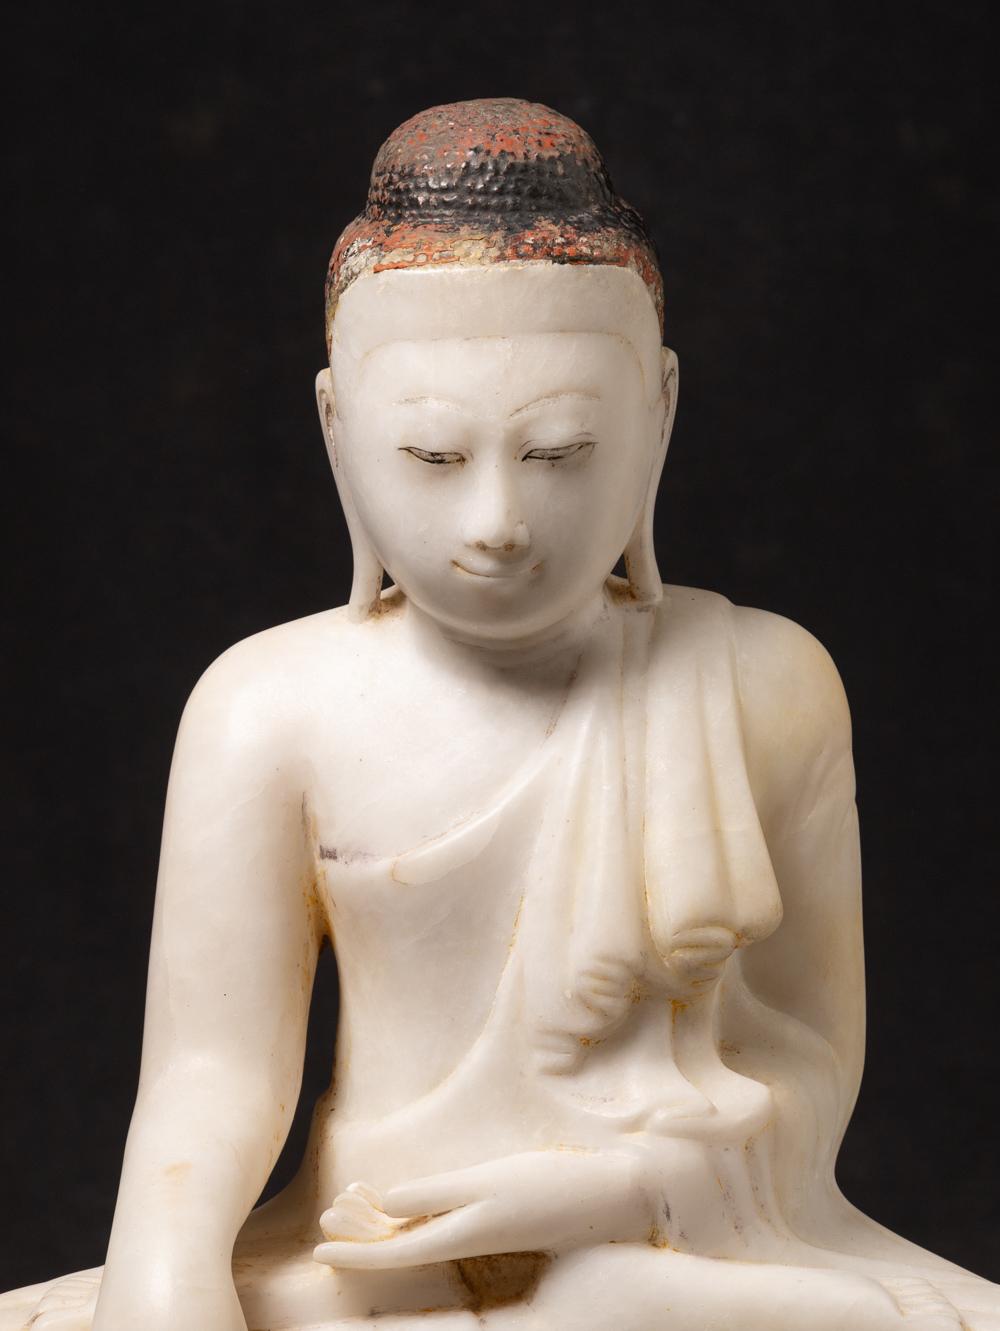 This antique marble Burmese Buddha statue is a magnificent representation of artistry and Buddhist devotion. Crafted from marble, it stands at an impressive height of 53.5 cm and has dimensions of 46.5 cm in width and 24 cm in depth. 

The statue is